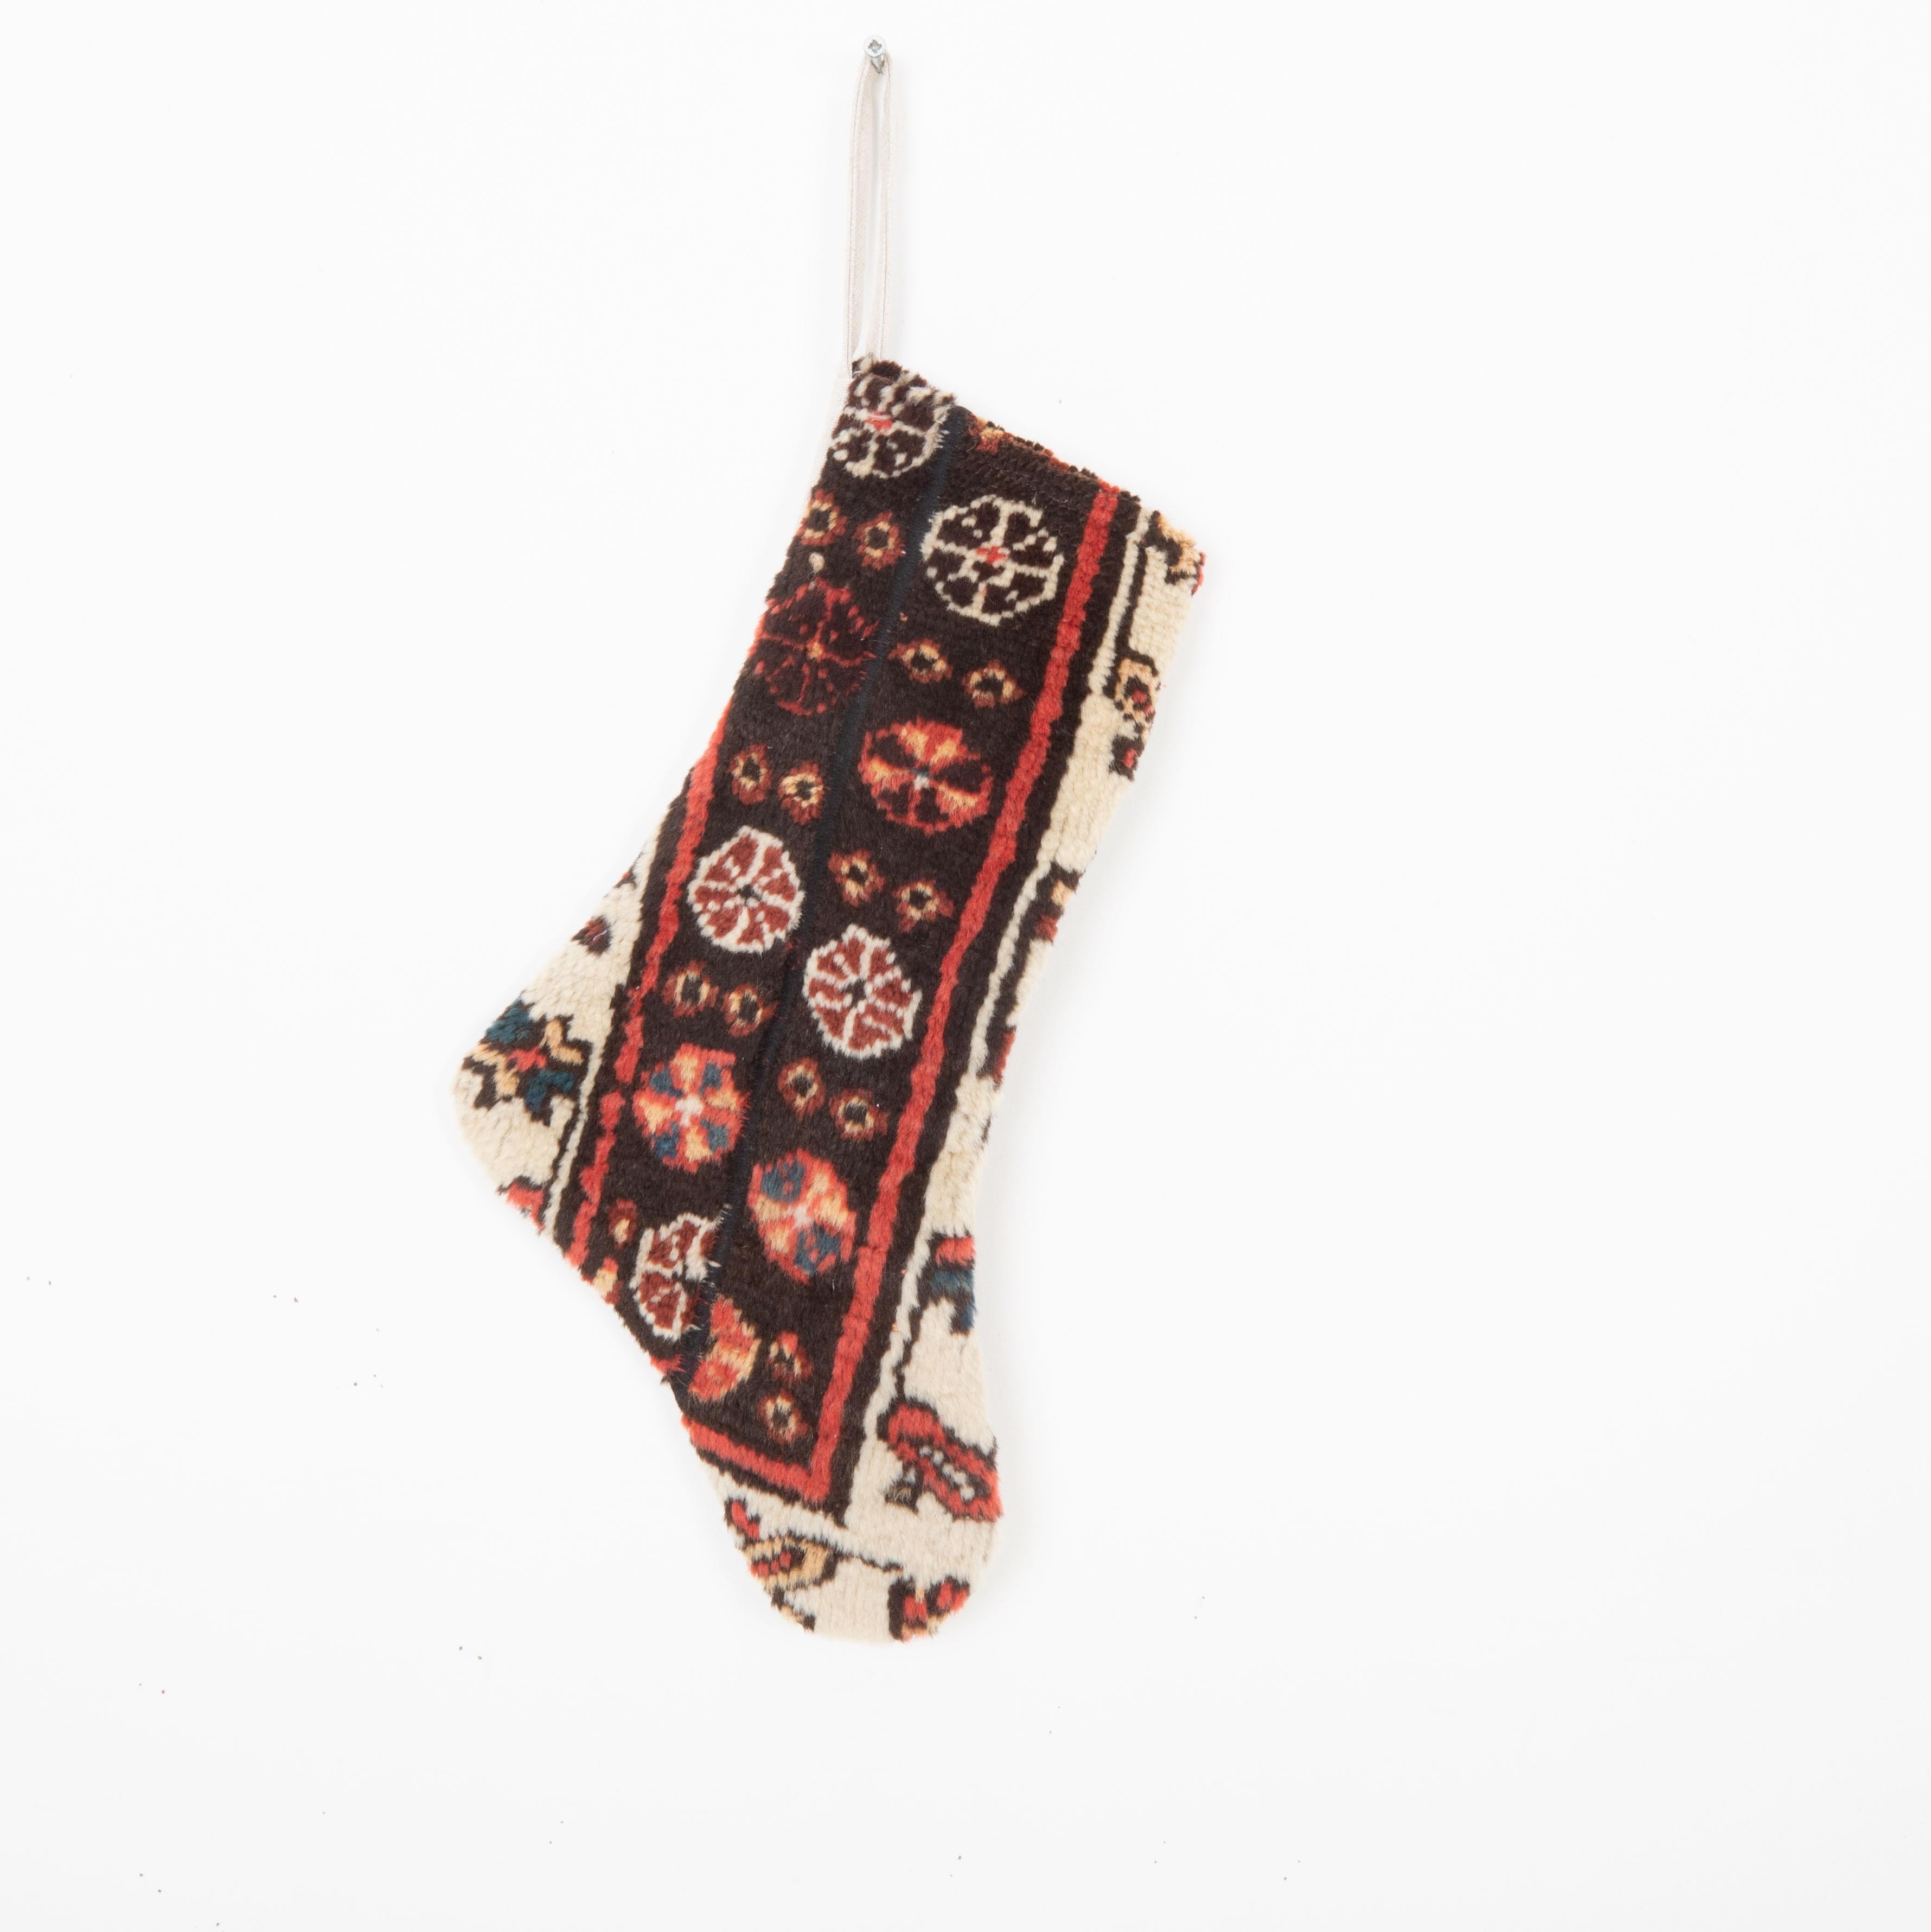 This Christmas Stocking was made from a late 19th or Early 20th C. Caucasıan rug fragments.
Linen in the back.

Please note, this stocking was made from caucasian 
